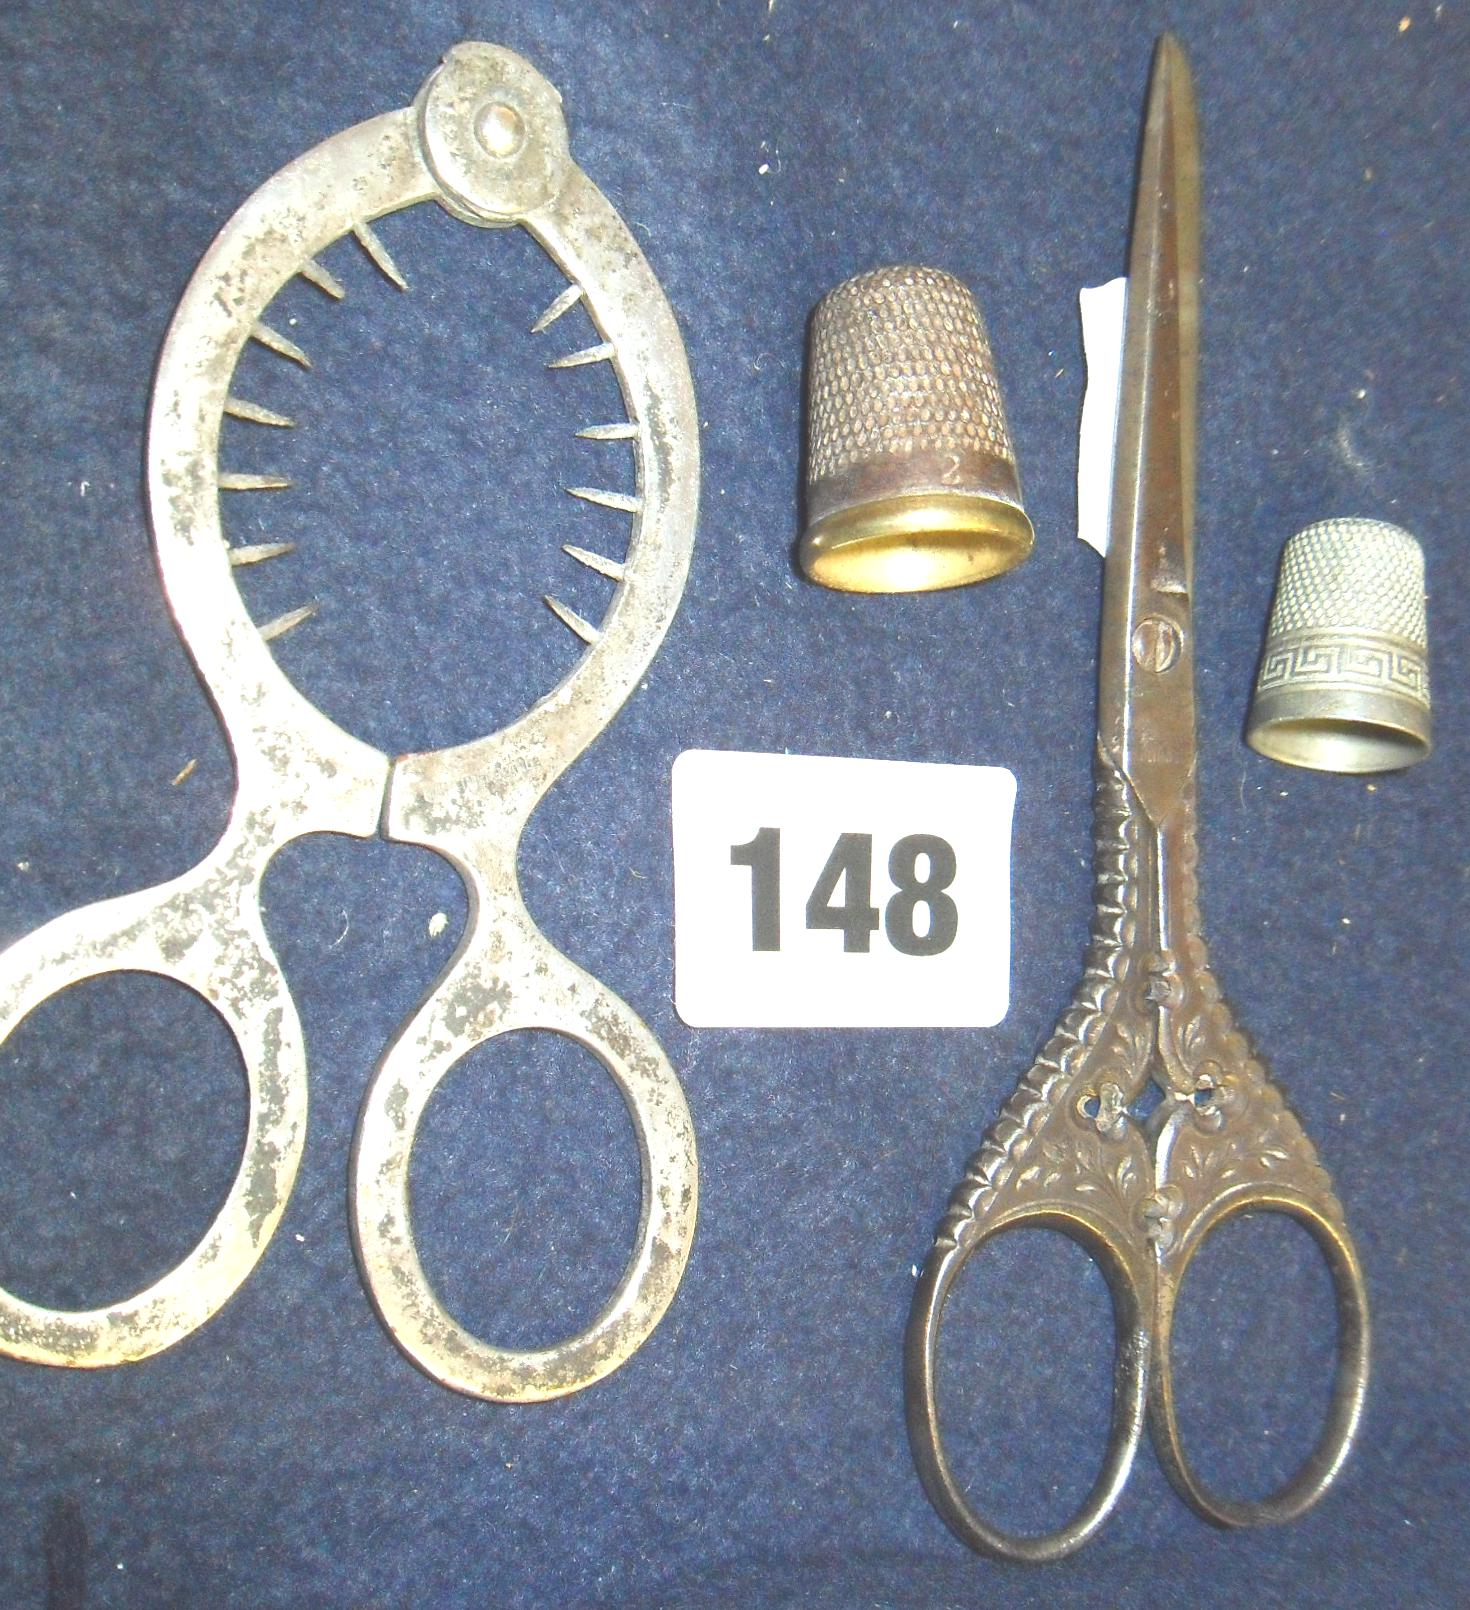 Pair of Victorian ornate steel sewing scissors, “egg” scissors, and two thimbles